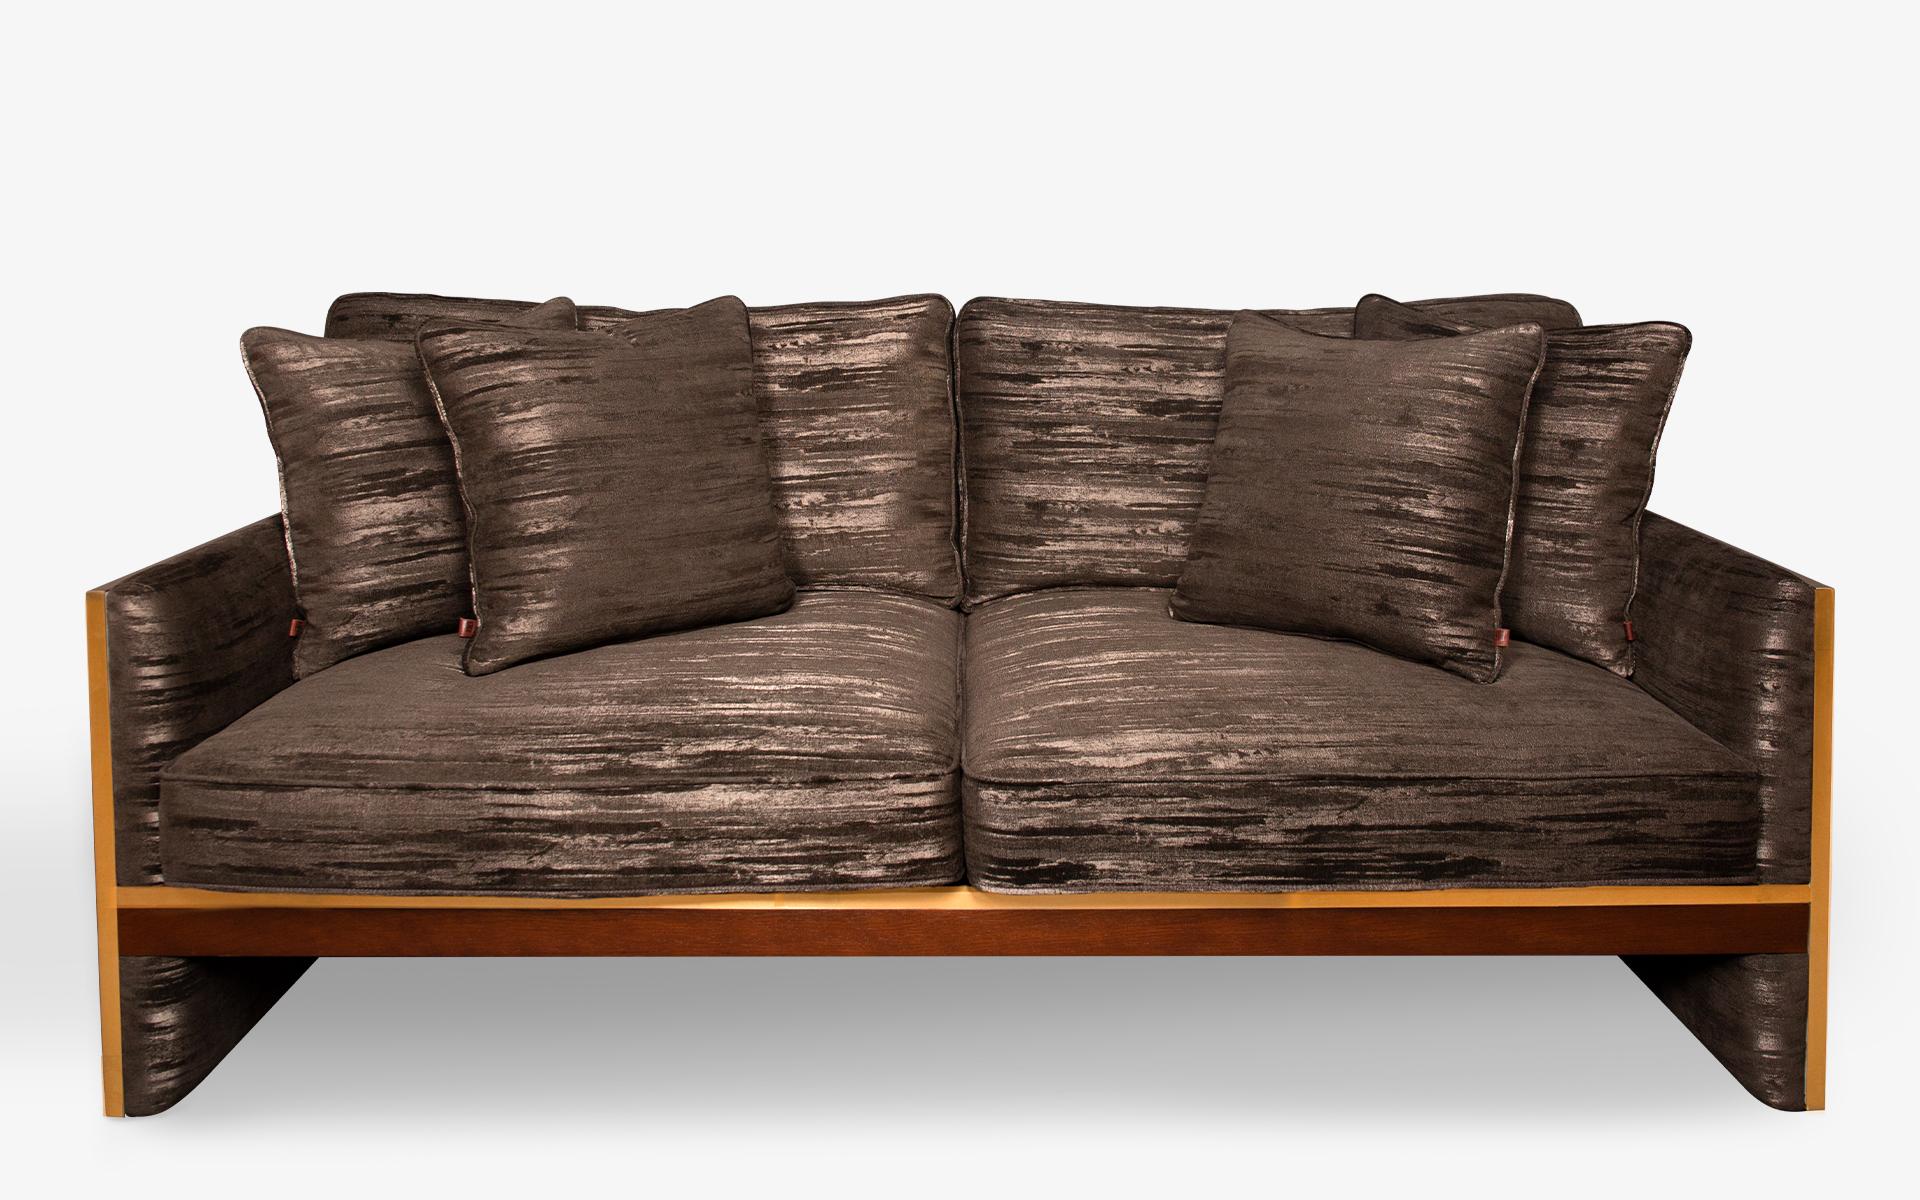 The famed two seater sofa harmoniously combines fabric with brass adding an impressionable air of quality to your space...

Materials:
-Brass 
-First grade alder
-First grade oak veneer
-Registered Design

Alternatives:
-Brass / Matt Chrome / black